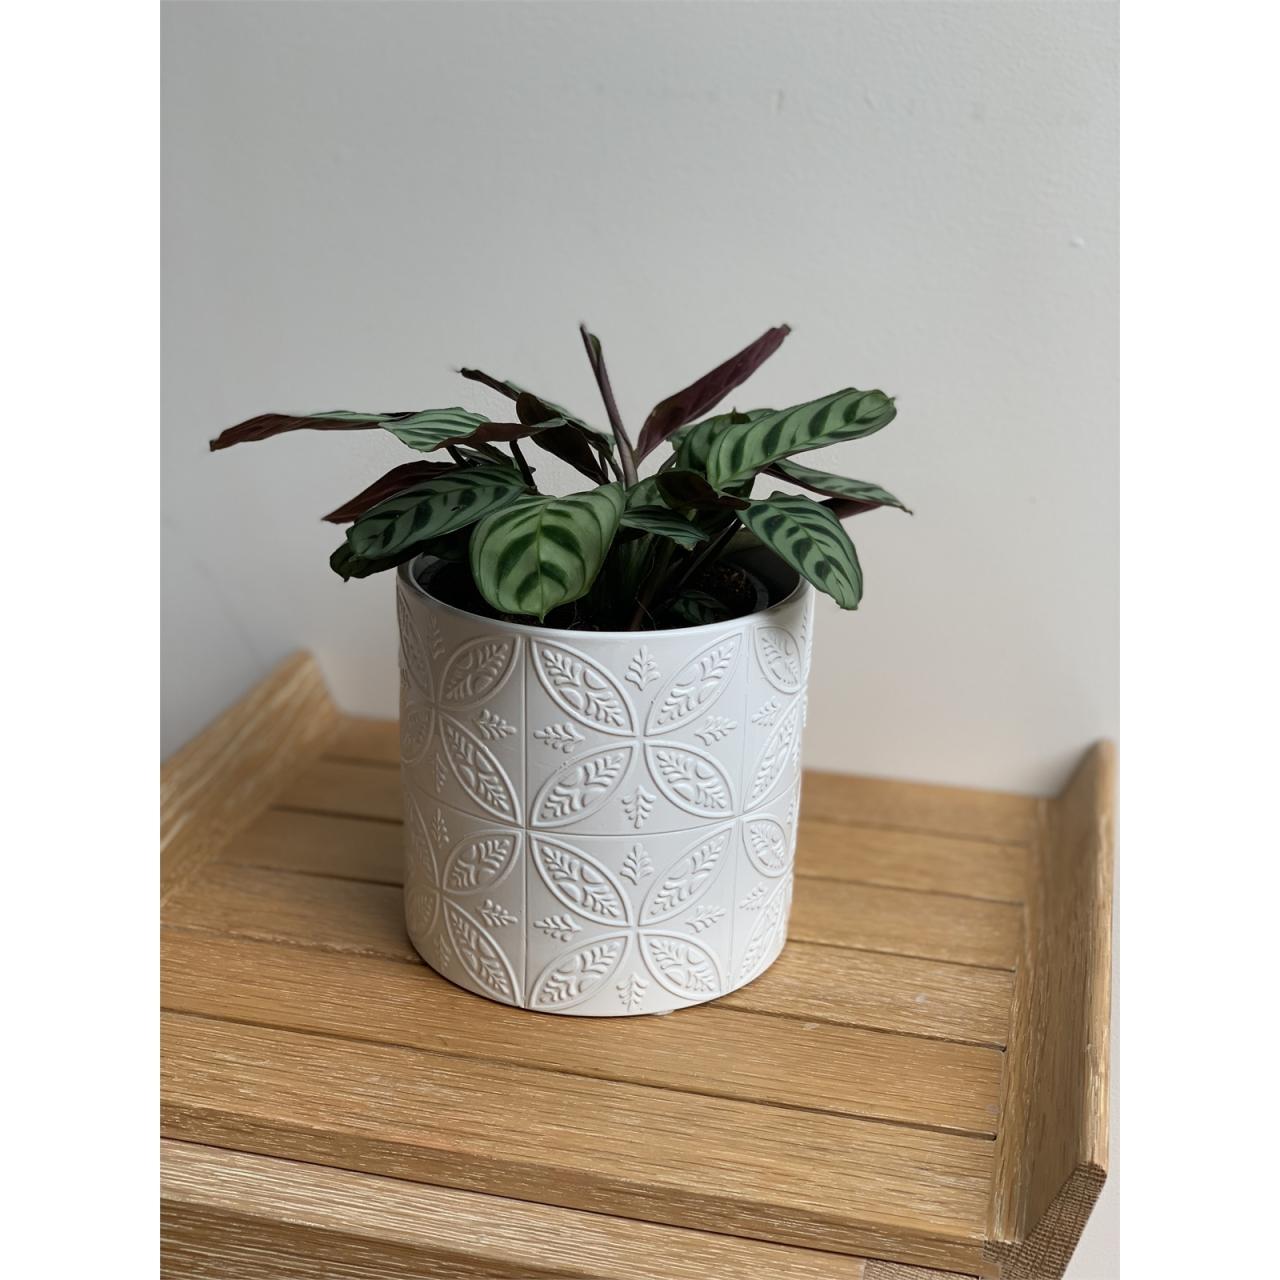 Hanging Plants Indoor | Explore Bunnings Decorative Pots: A Guide to Enhance Your Home Décor